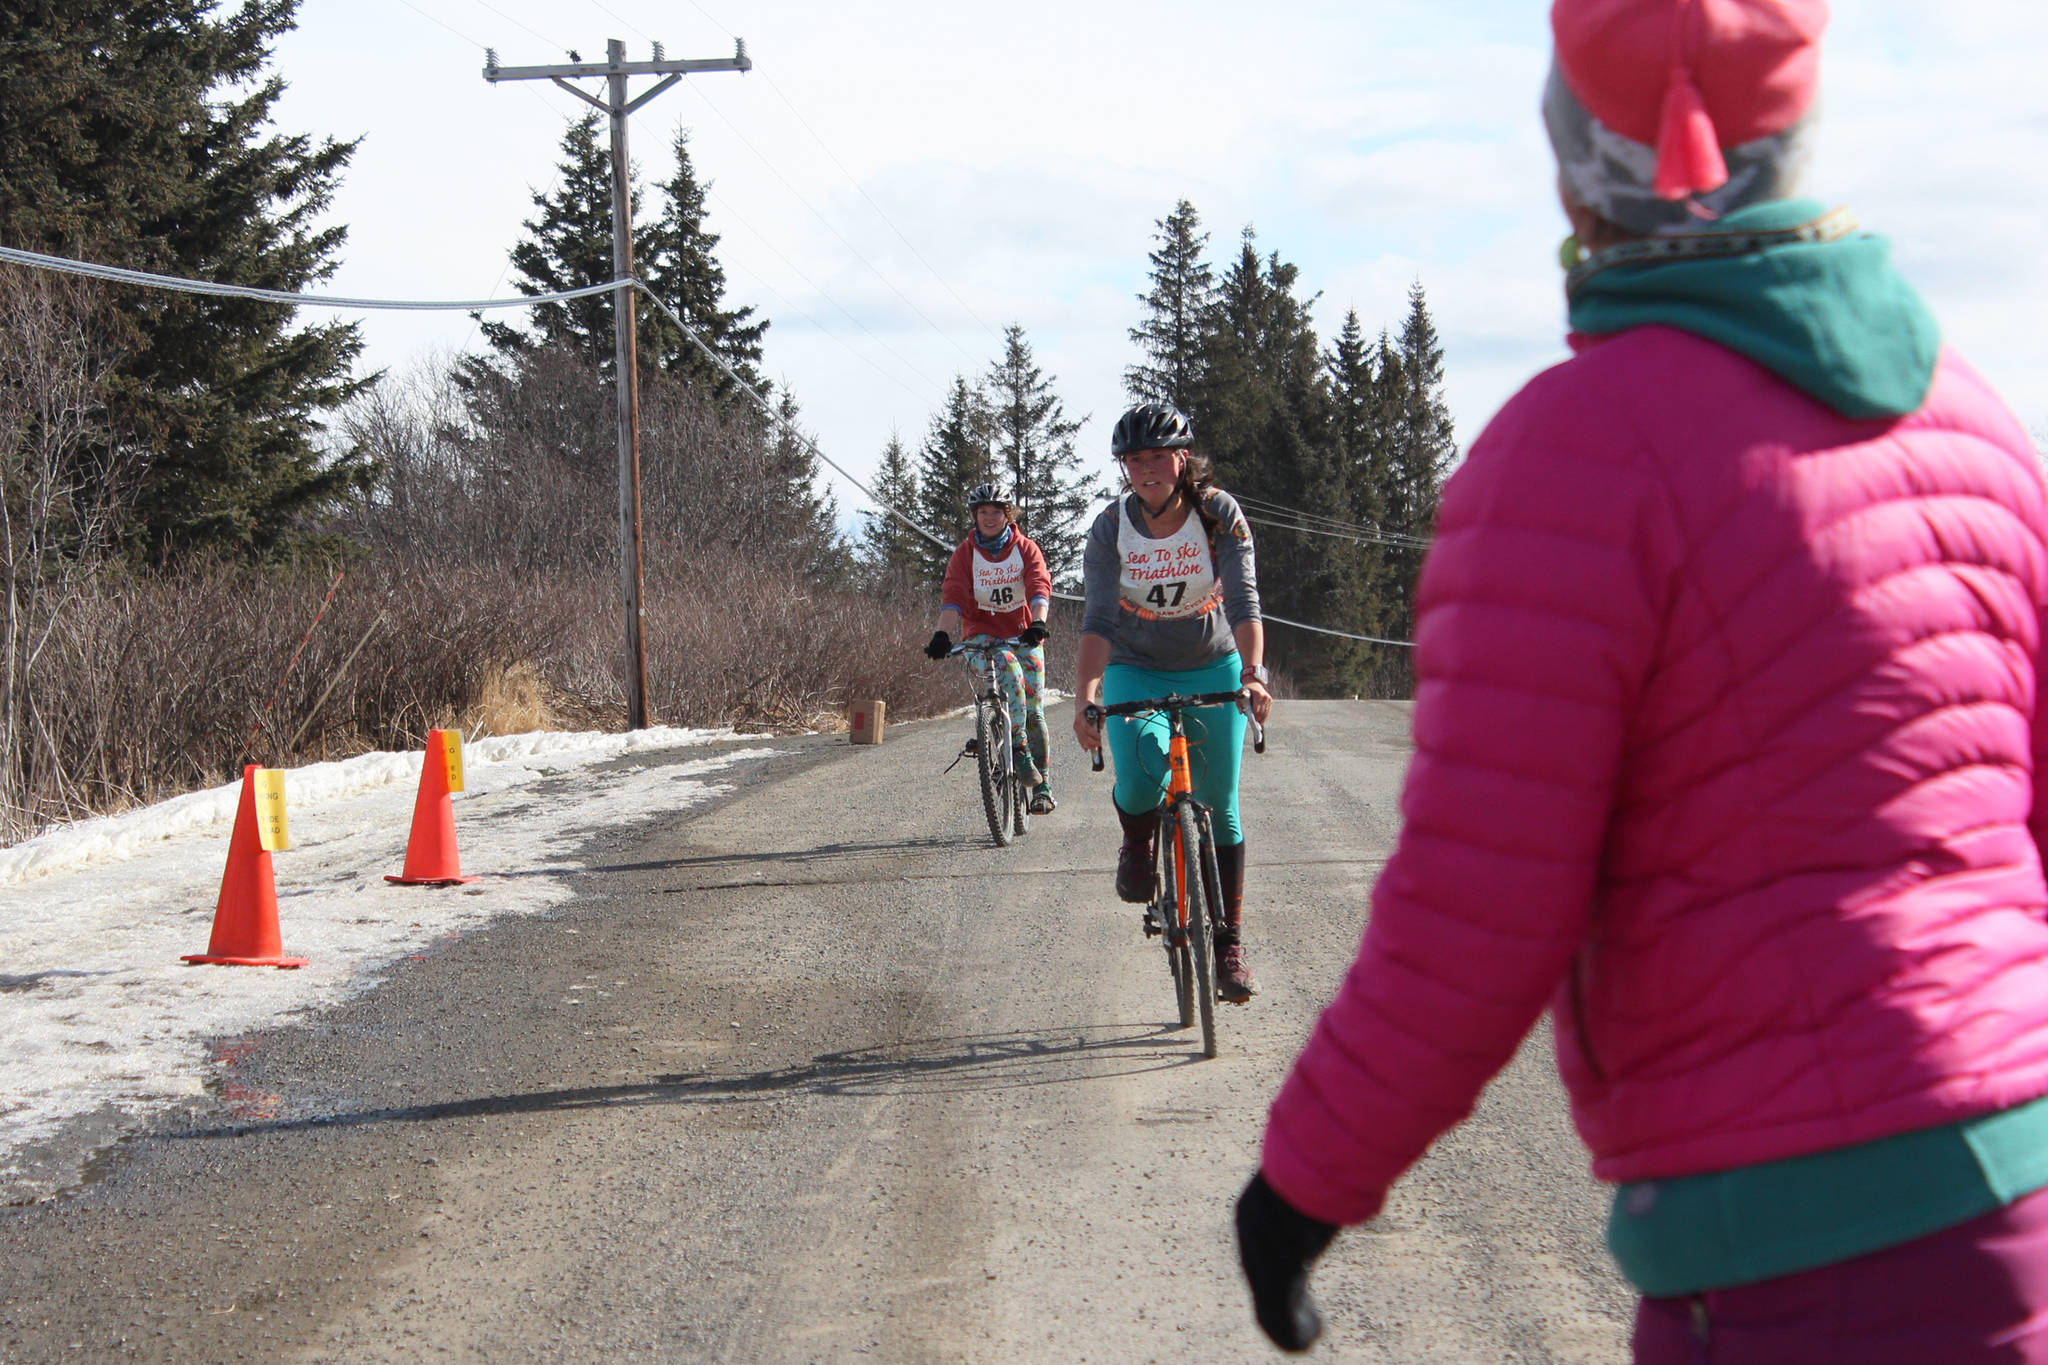 Two cyclists approach the transition area of this year’s Sea to Ski Triathlon on Highland Avenue on Sunday, March 25, 2018 in Homer, Alaska. The bike portion of the race takes participants on a brutal climb up West Hill Road. (Photo by Megan Pacer/Homer News)